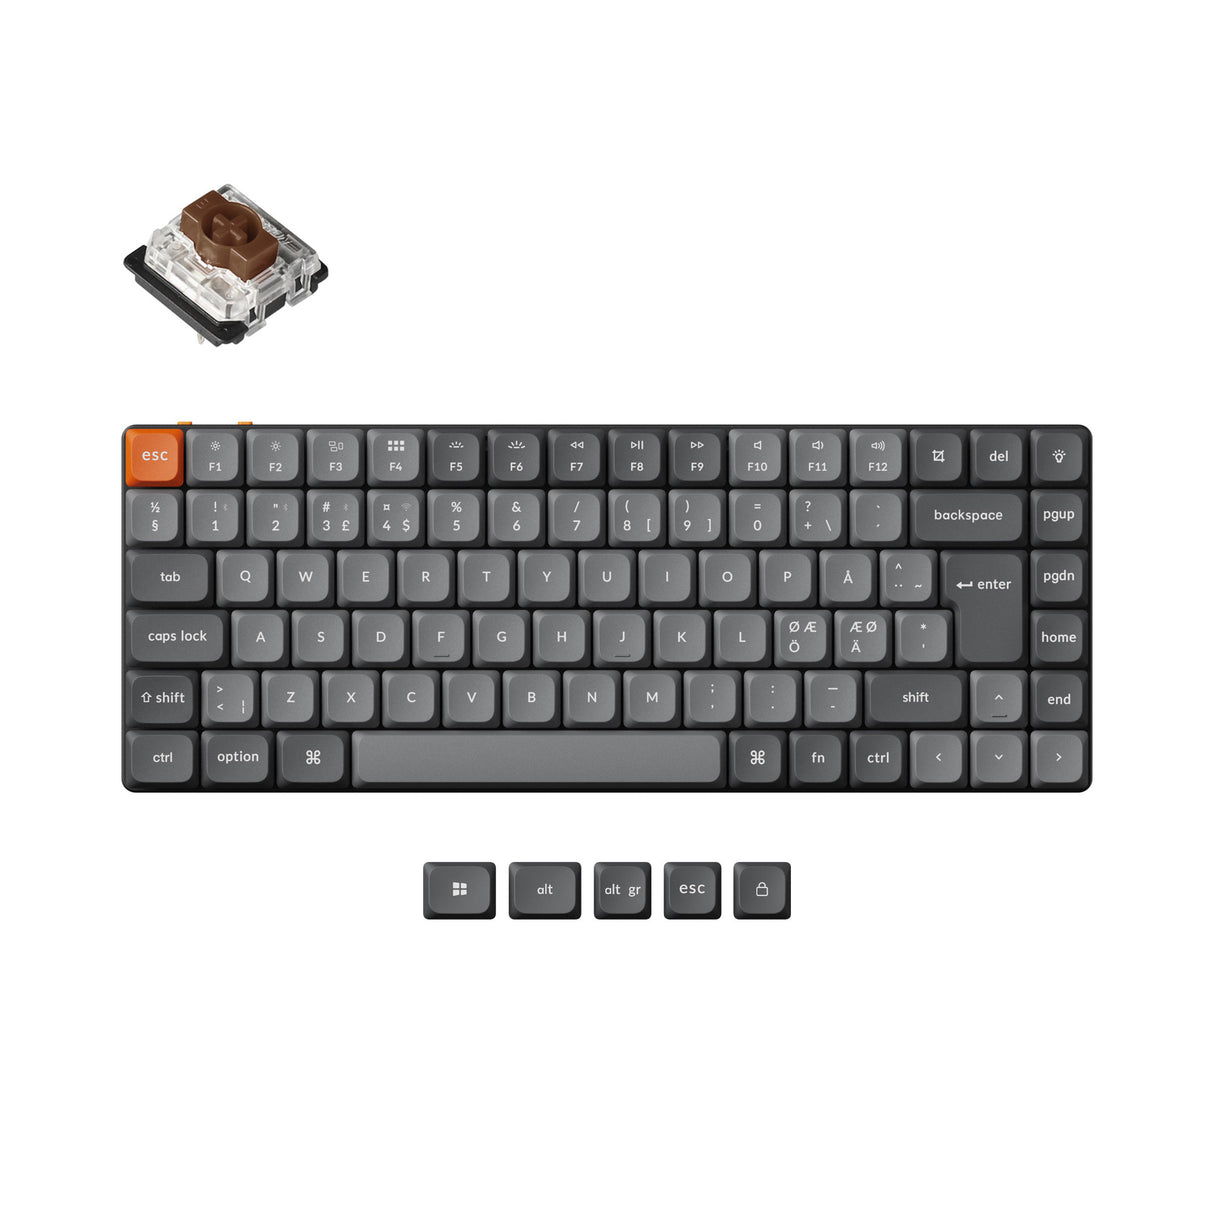 Keychron K3 Max QMK VIA ultra slim custom mechanical keyboard 75 percent layout PBT Keycaps hot-swappable Gateron low profile switch brown ISO Nordic layout